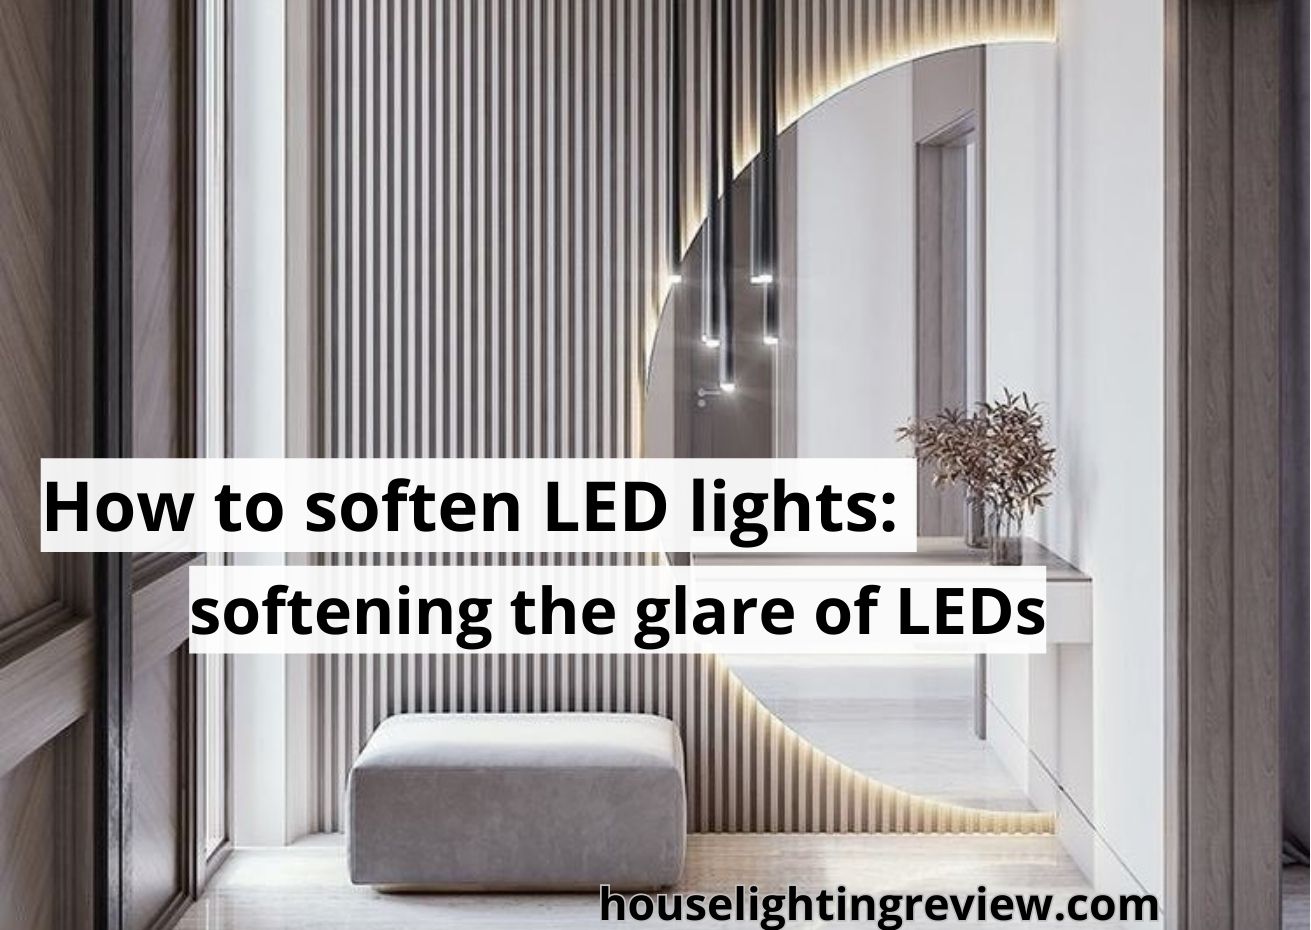 How to soften LED lights? The best guide with 15+ tips